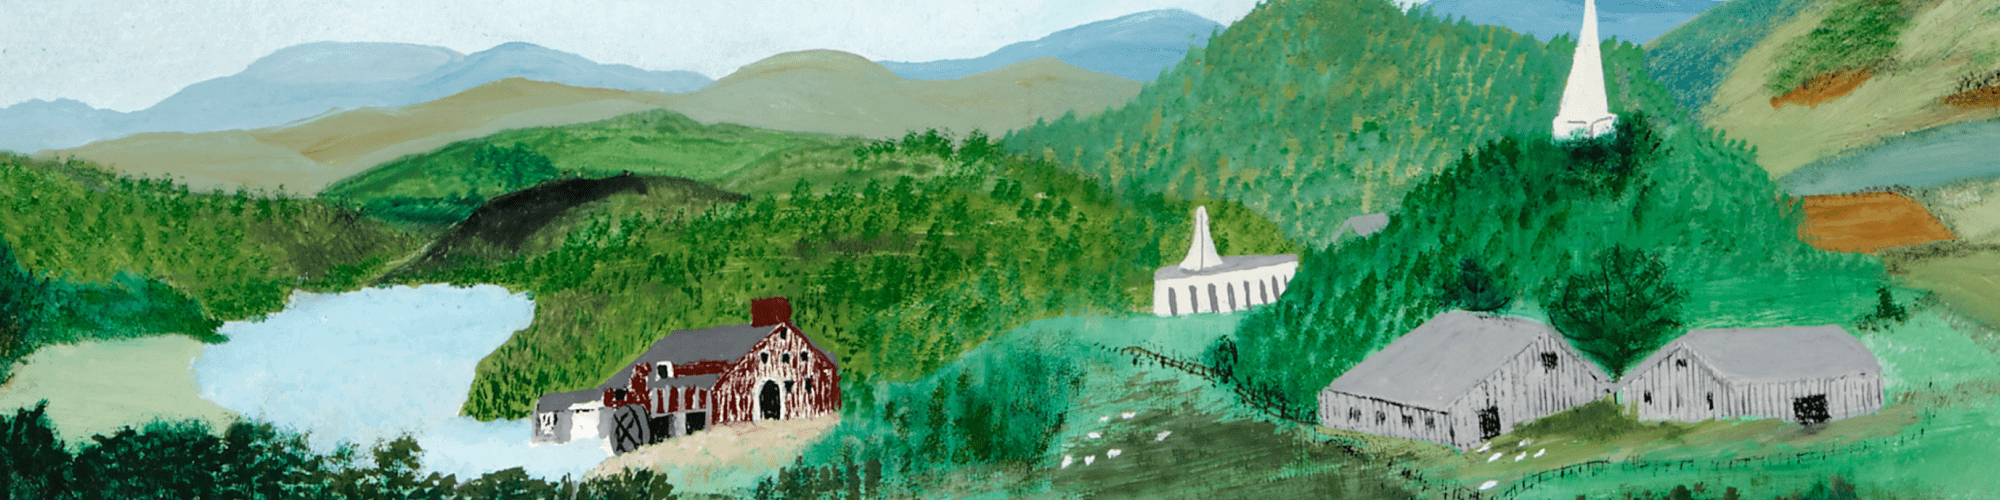 Detail of a painting by folk artist Grandma Moses depicting a green valley scene with a river, hills, and houses